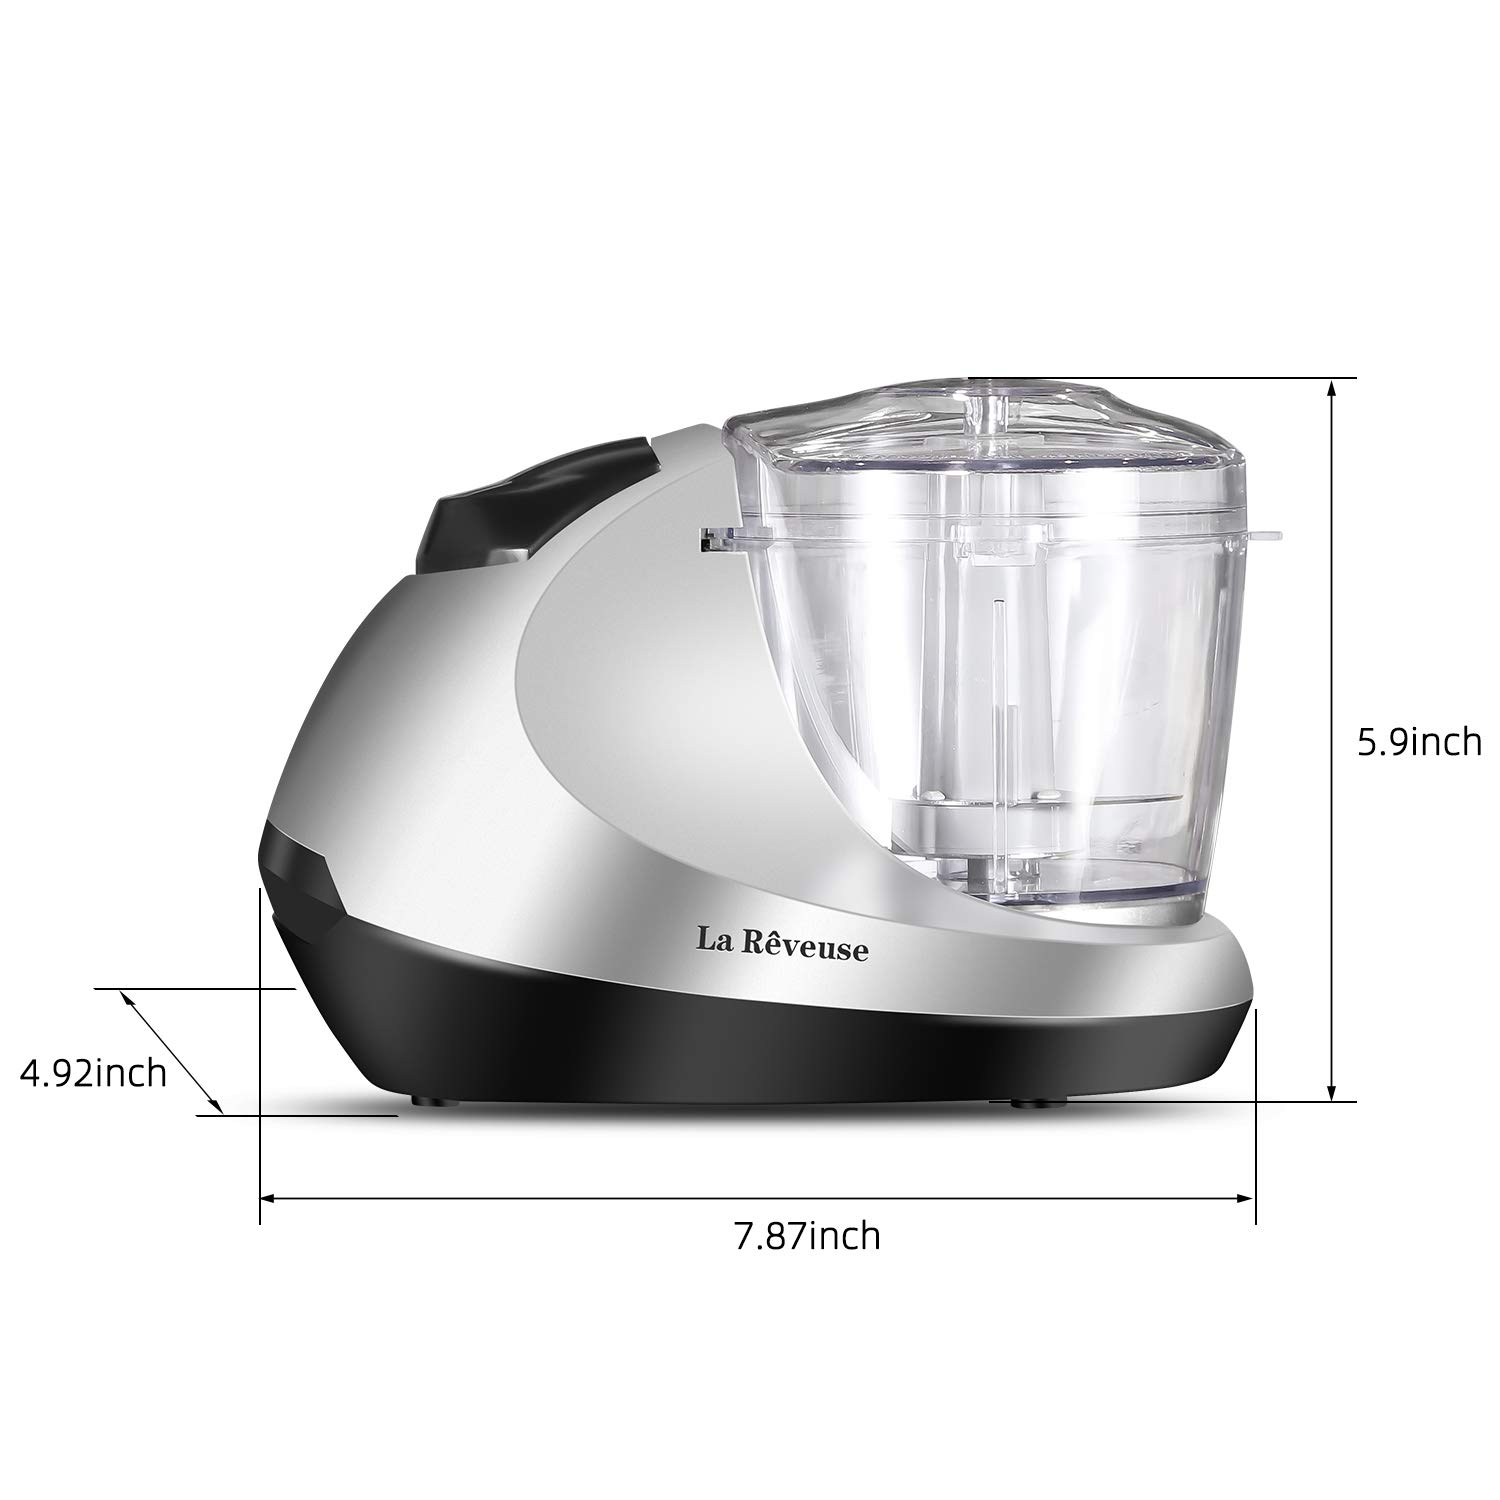 La Reveuse Electric Mini Food Chopper Vegetable Fruit Cutter Meat Grinder Mincer Small Food Processor with 1.3-Cup Prep Bowl, Silver